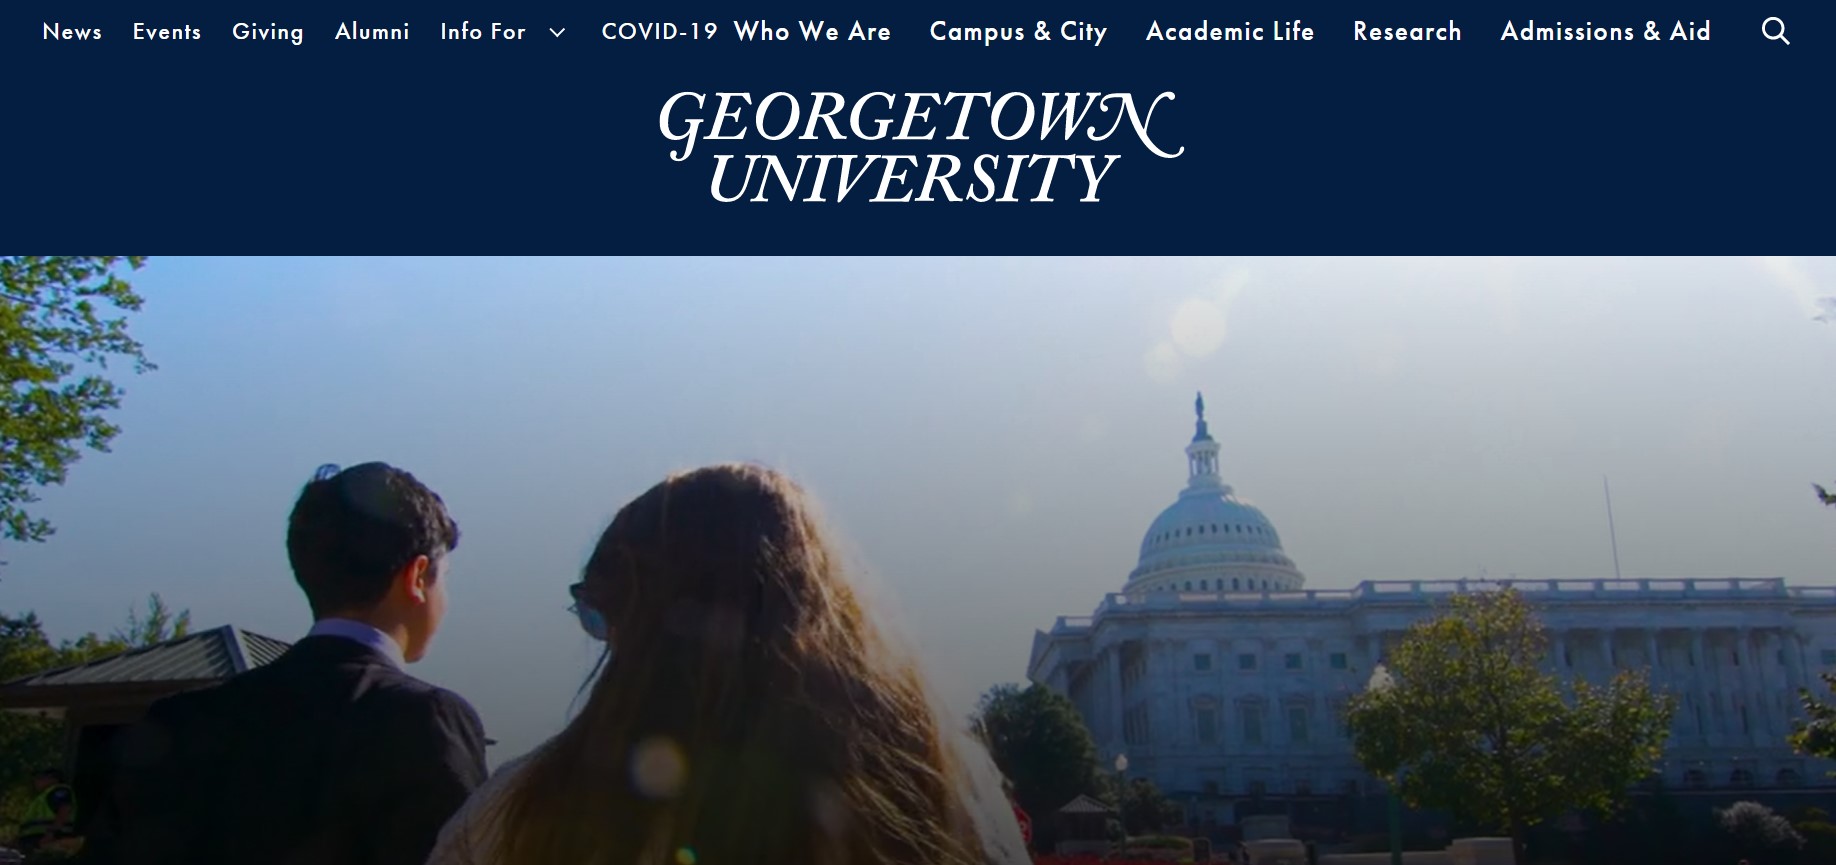 Georgetown University’s homepage includes options to learn more about the alumni experience, campus and city life, and academic life.